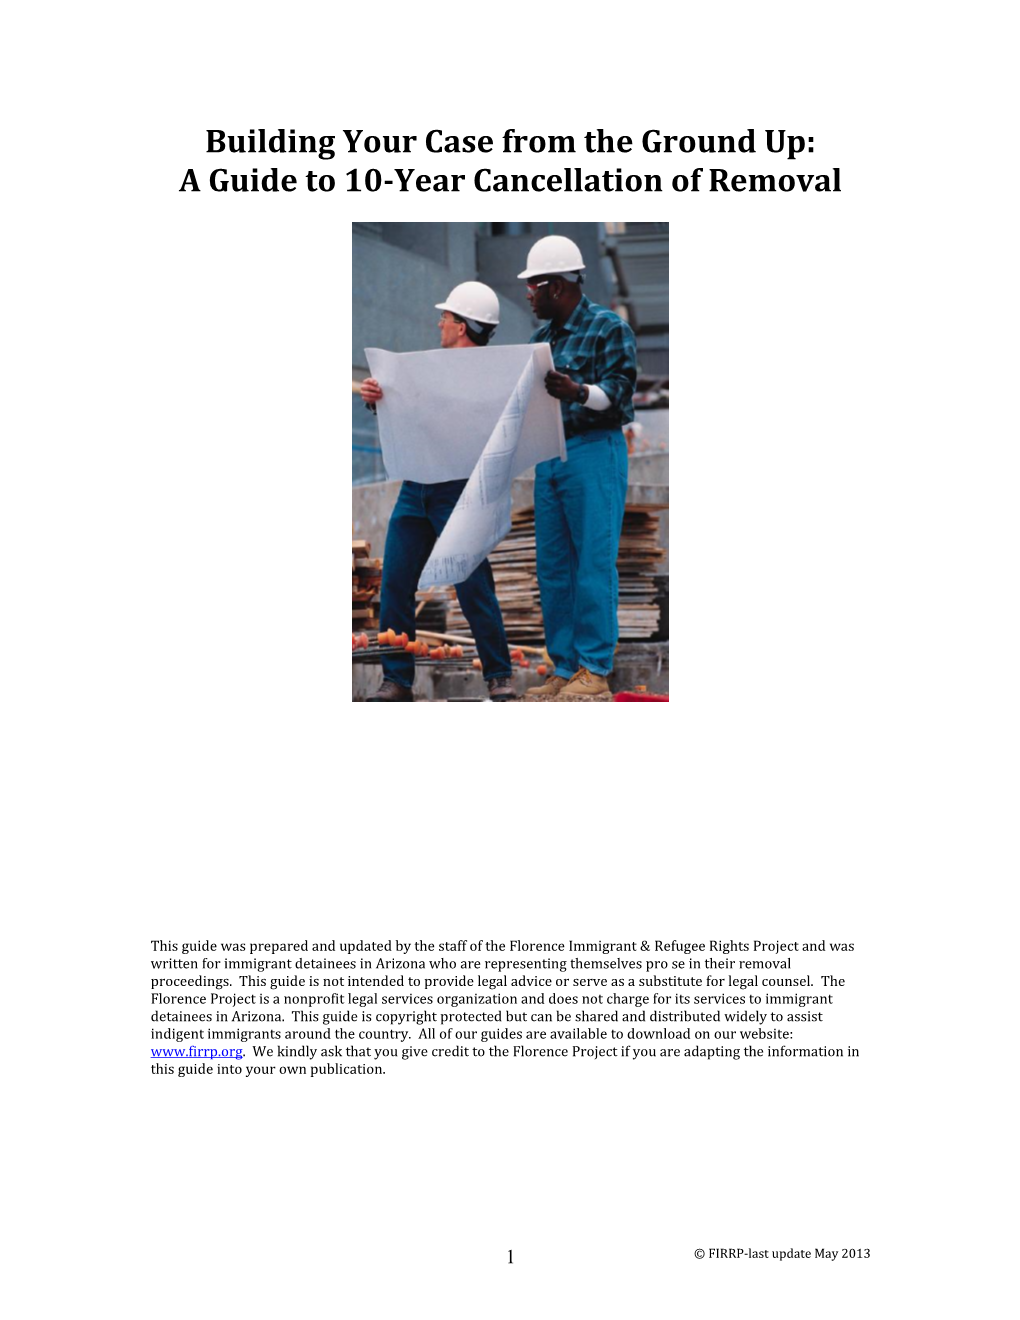 A Guide to 10-Year Cancellation of Removal